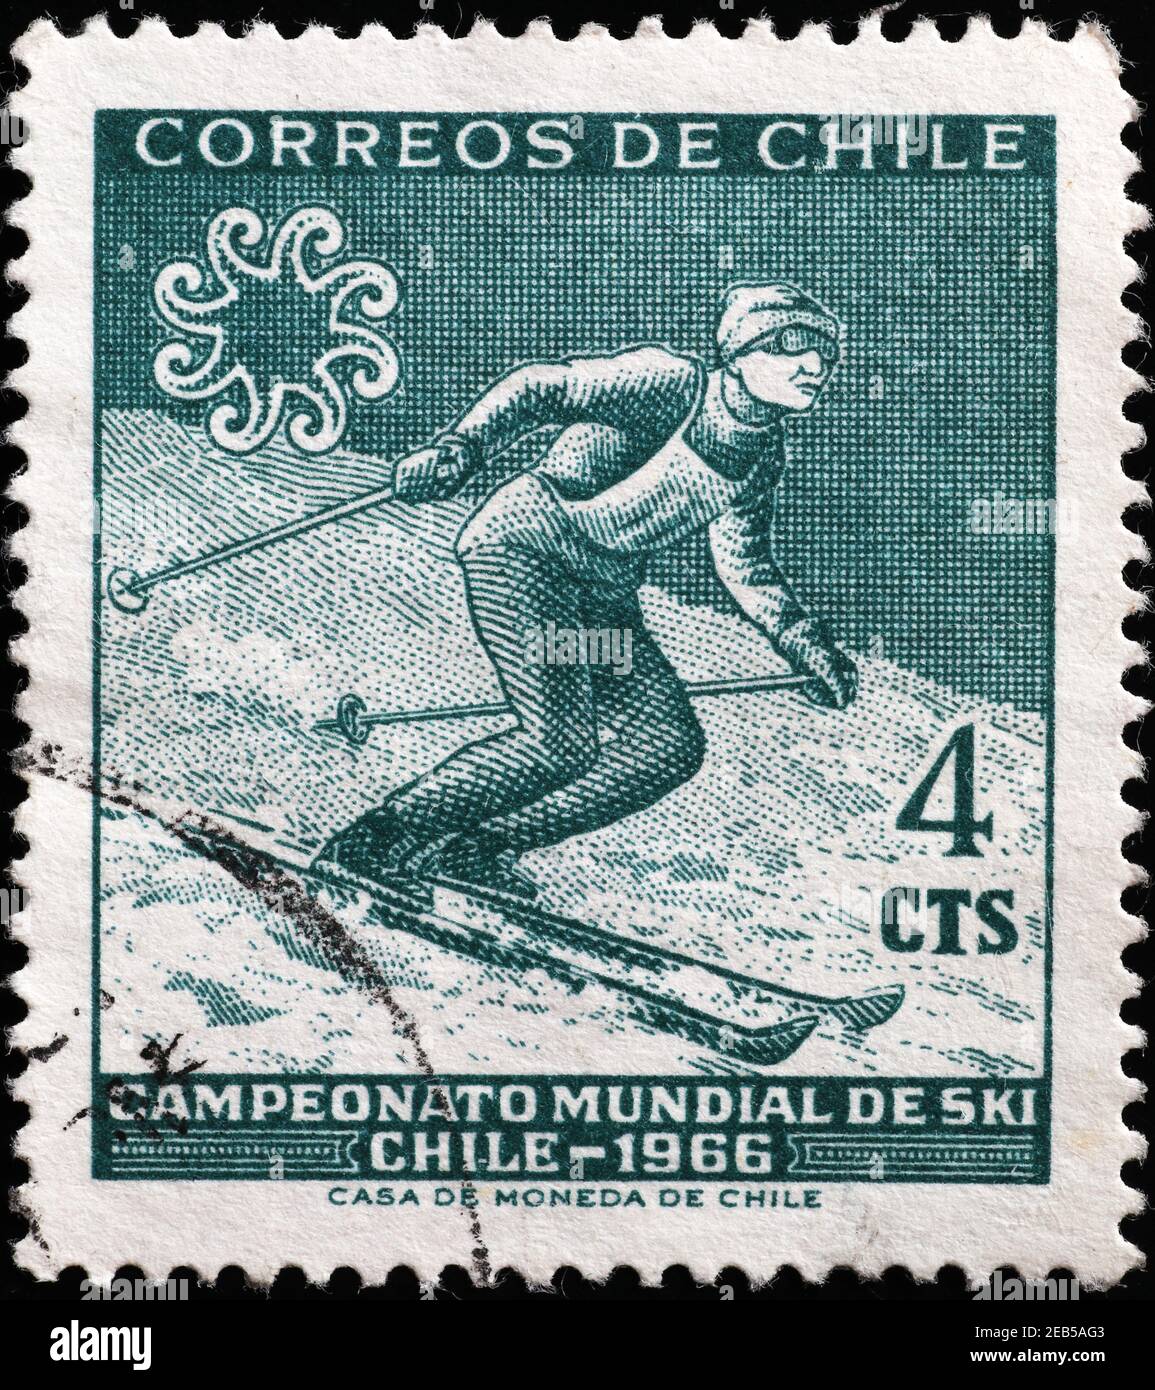 Slalom race on old chilean postage stamp Stock Photo